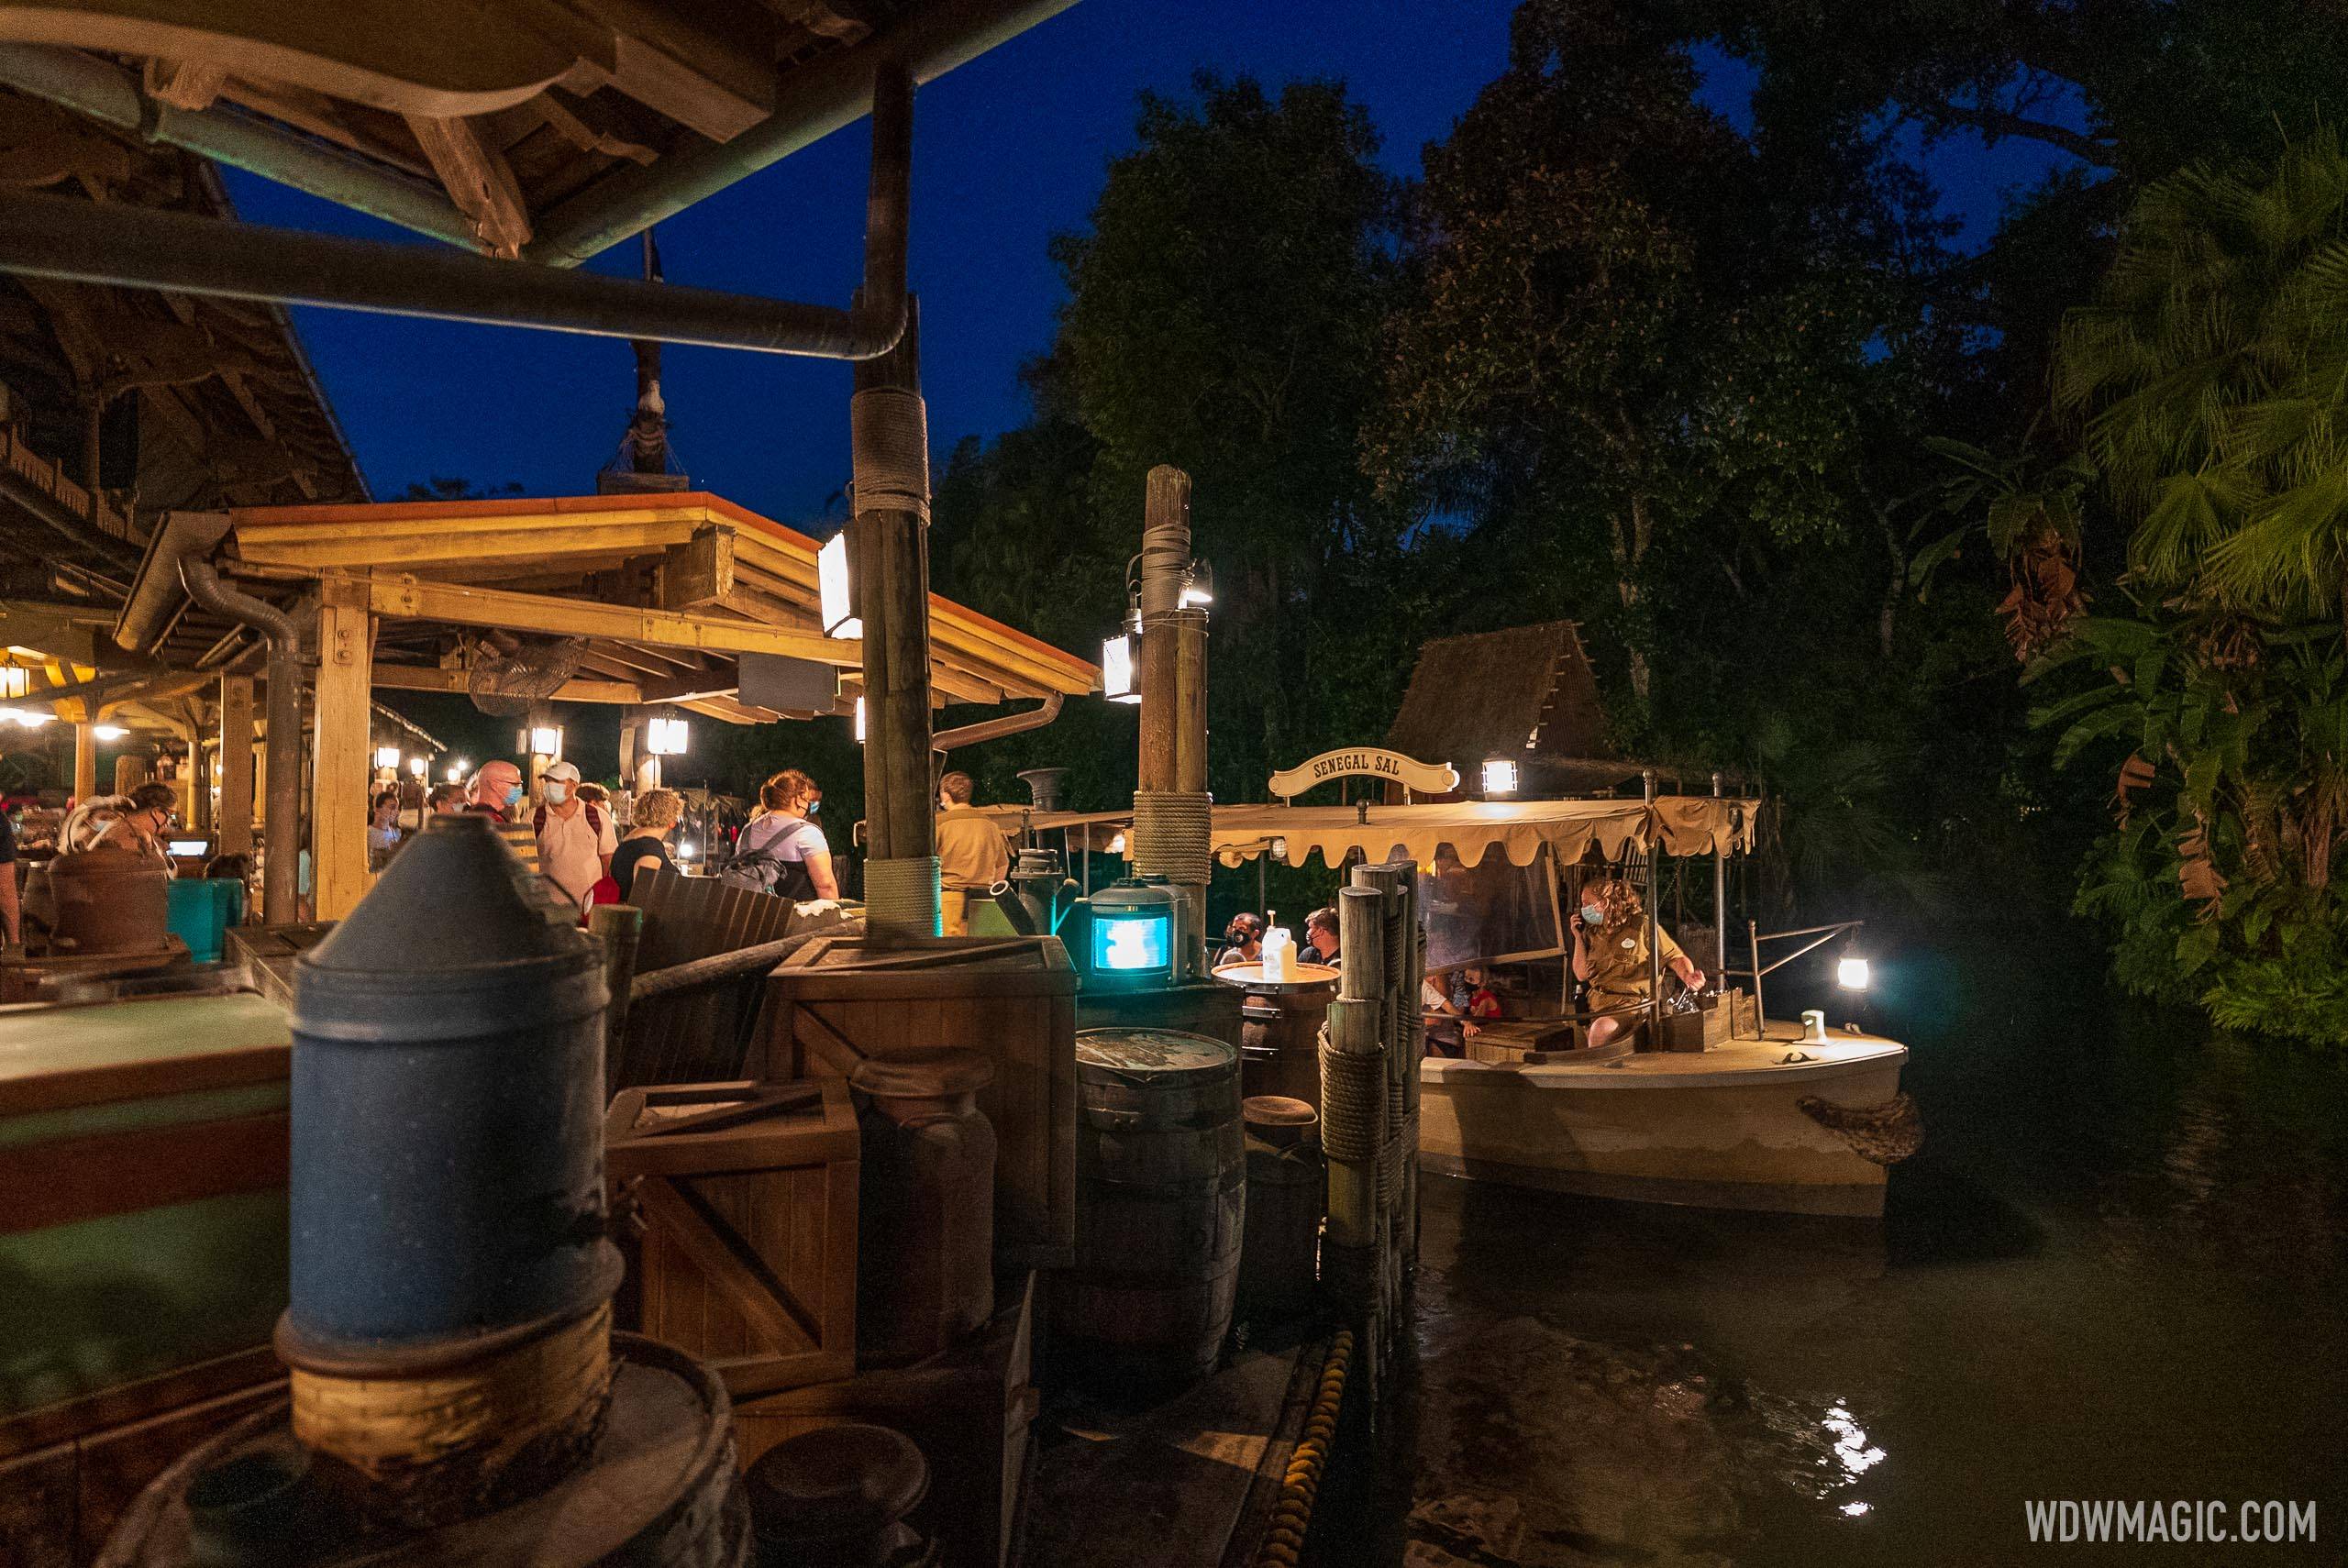 A closer look at the completed Jungle Cruise refresh at Disneyland